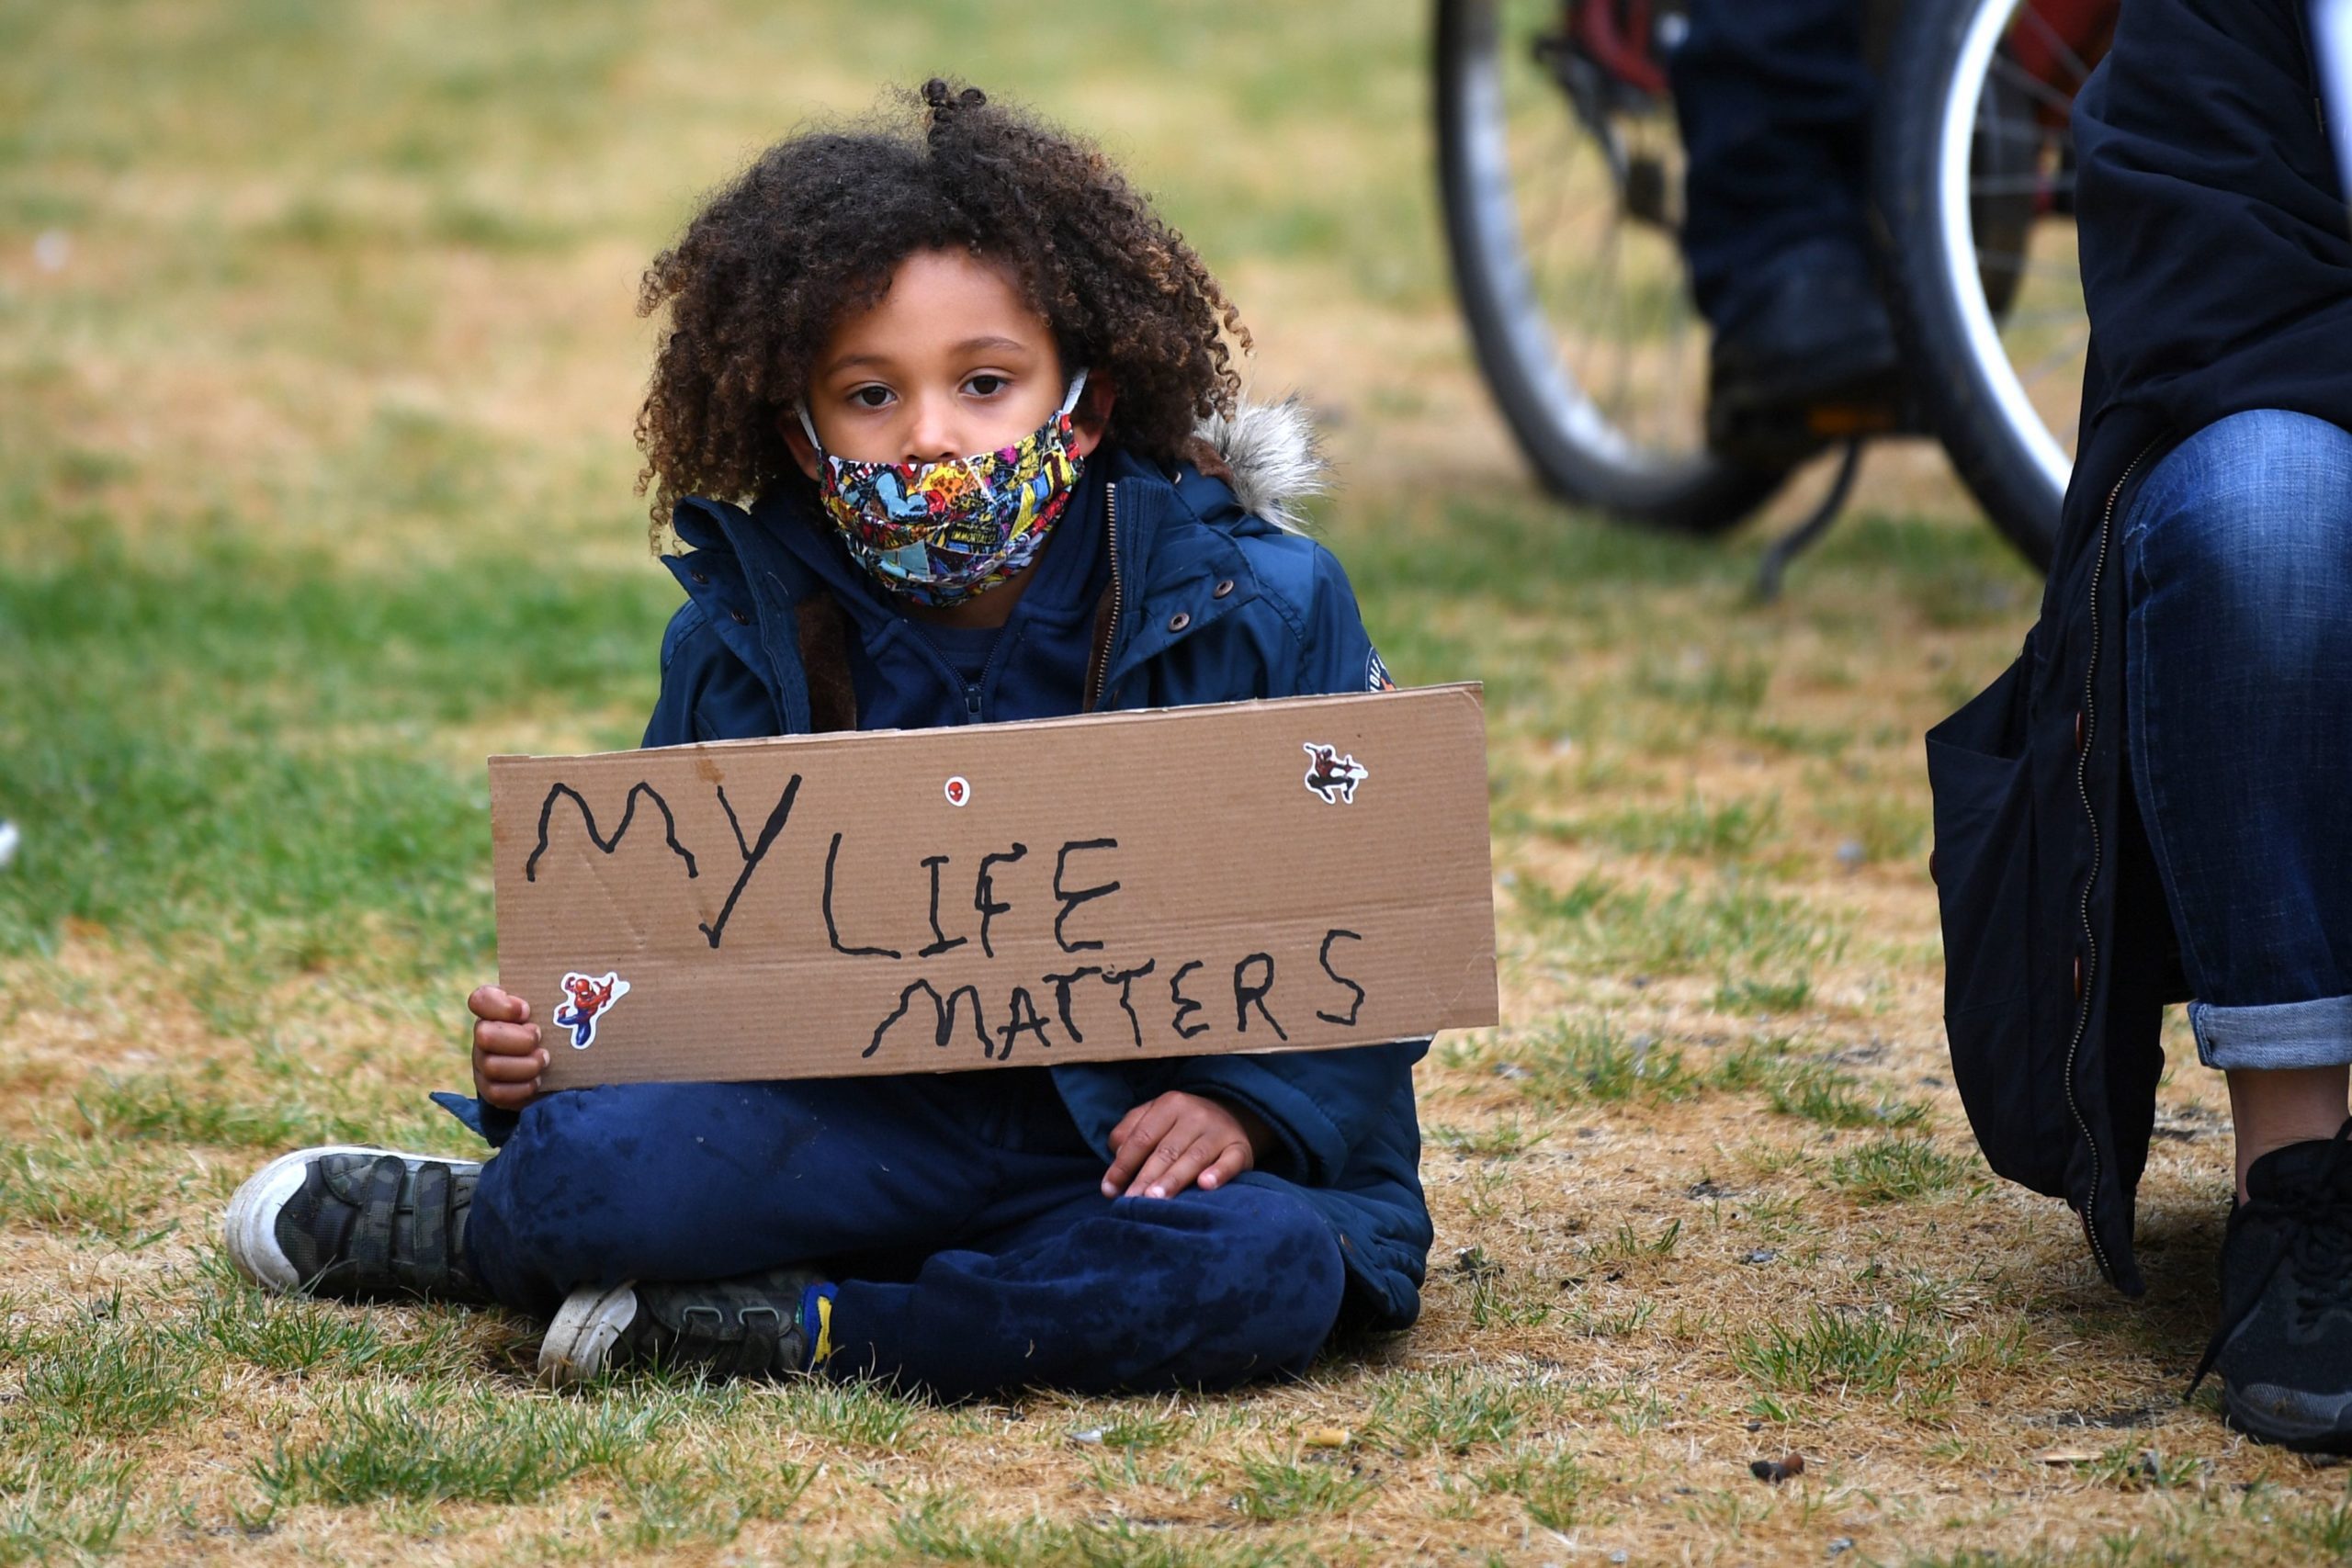 A young girl prepares for the Take The Knee demonstration in solidarity with Black Lives Matter in Windrush Square, Brixton, south west London on June 10, 2020. - Britain has seen days of protests sparked by the death in police custody of George Floyd, an unarmed black man, in the United States. (Photo by DANIEL LEAL-OLIVAS / AFP) (Photo by DANIEL LEAL-OLIVAS/AFP via Getty Images)